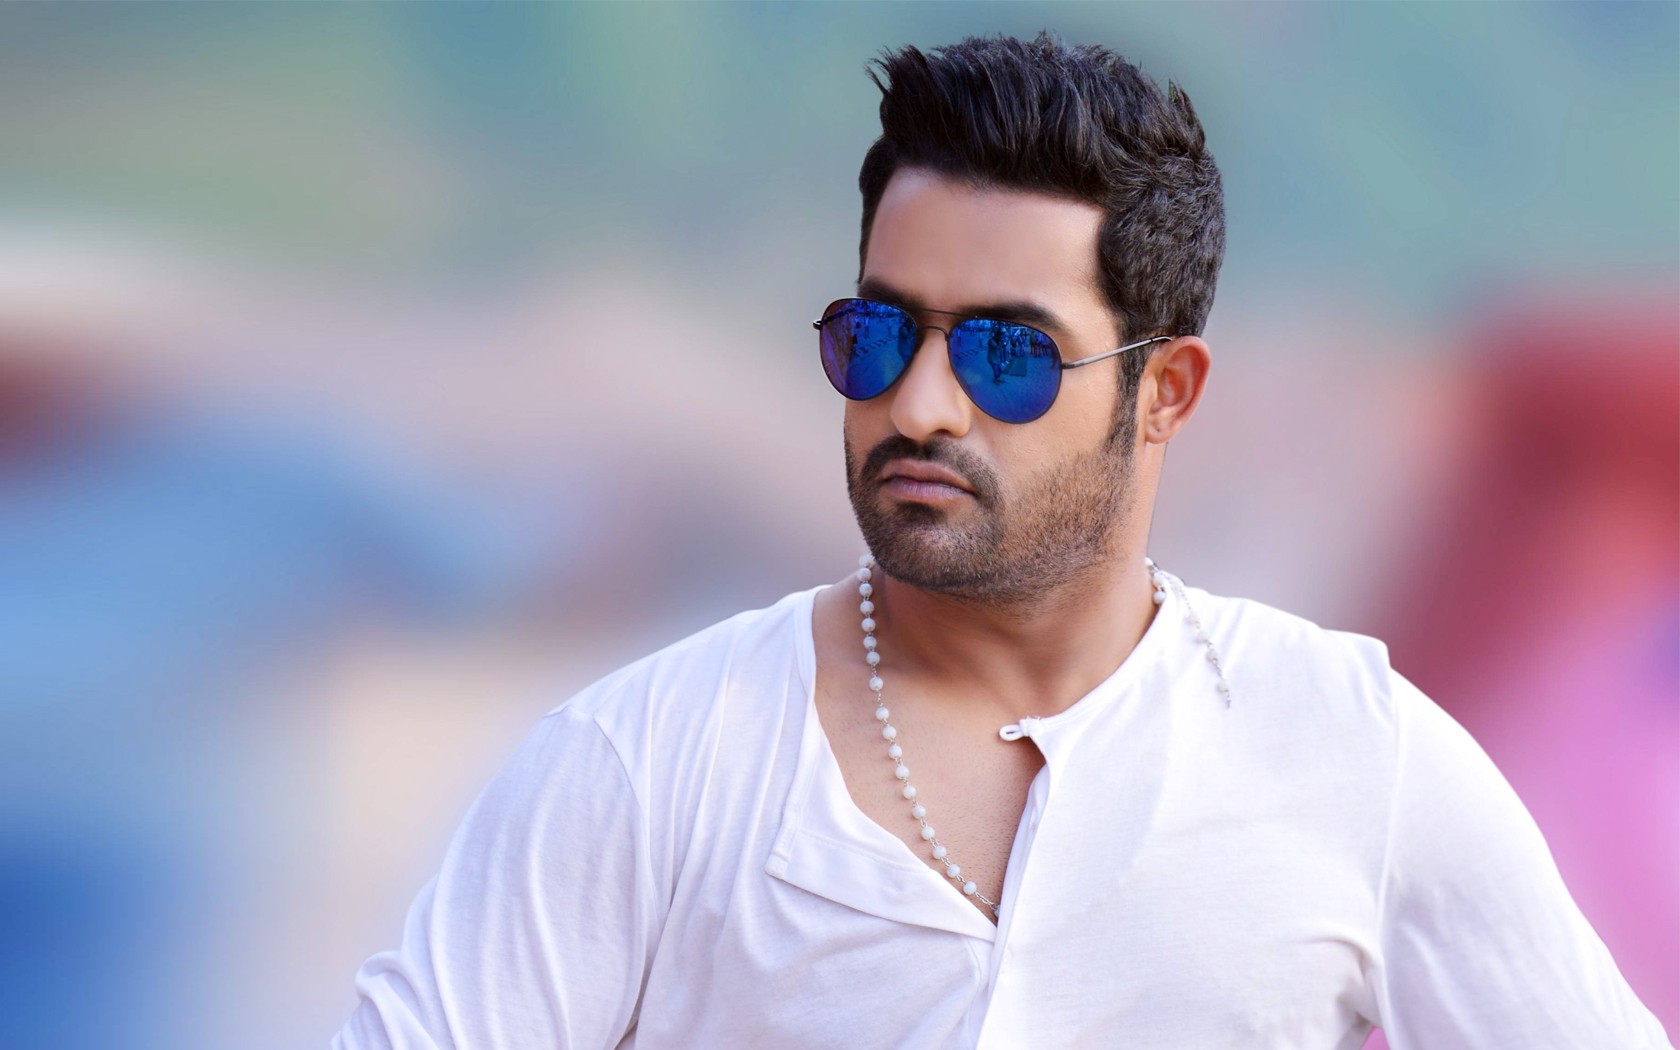 Collection of Incredible NTR Images Download in Full 4K - Over 999+ Images